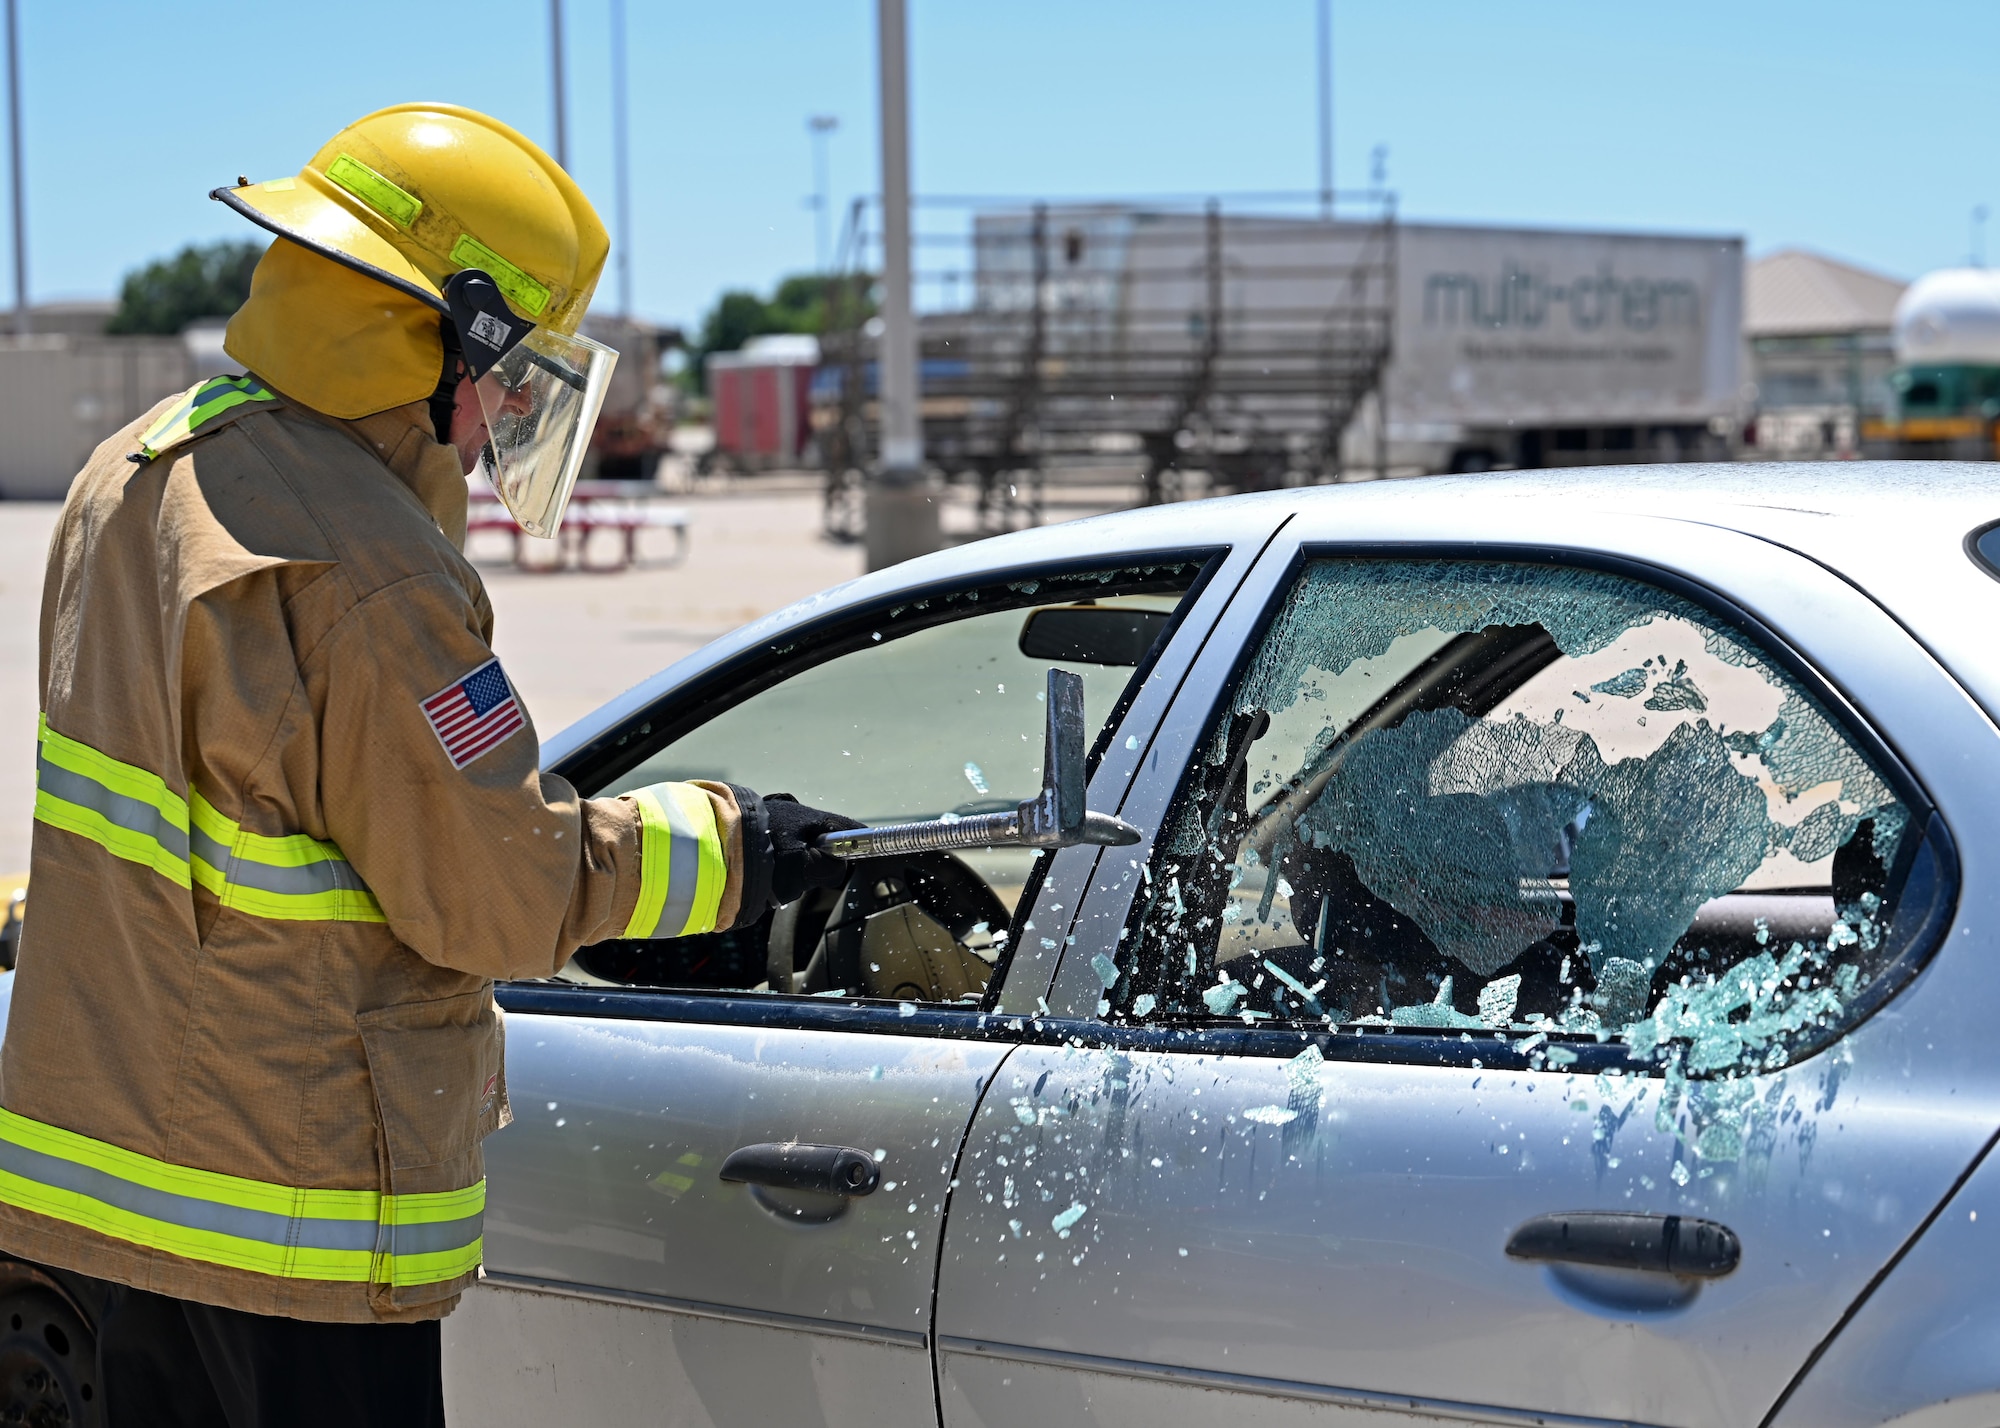 A 17th Training Wing honorary commander, Scott Creesy, breaks a car window at Goodfellow Air Force Base, Texas, June 8, 2023. Breaking the car window allowed firefighters to use hydraulic rescue tools to detach the door so they can provide care to a car accident victim. (U.S. Air Force photo by Senior Airman Sarah Williams)